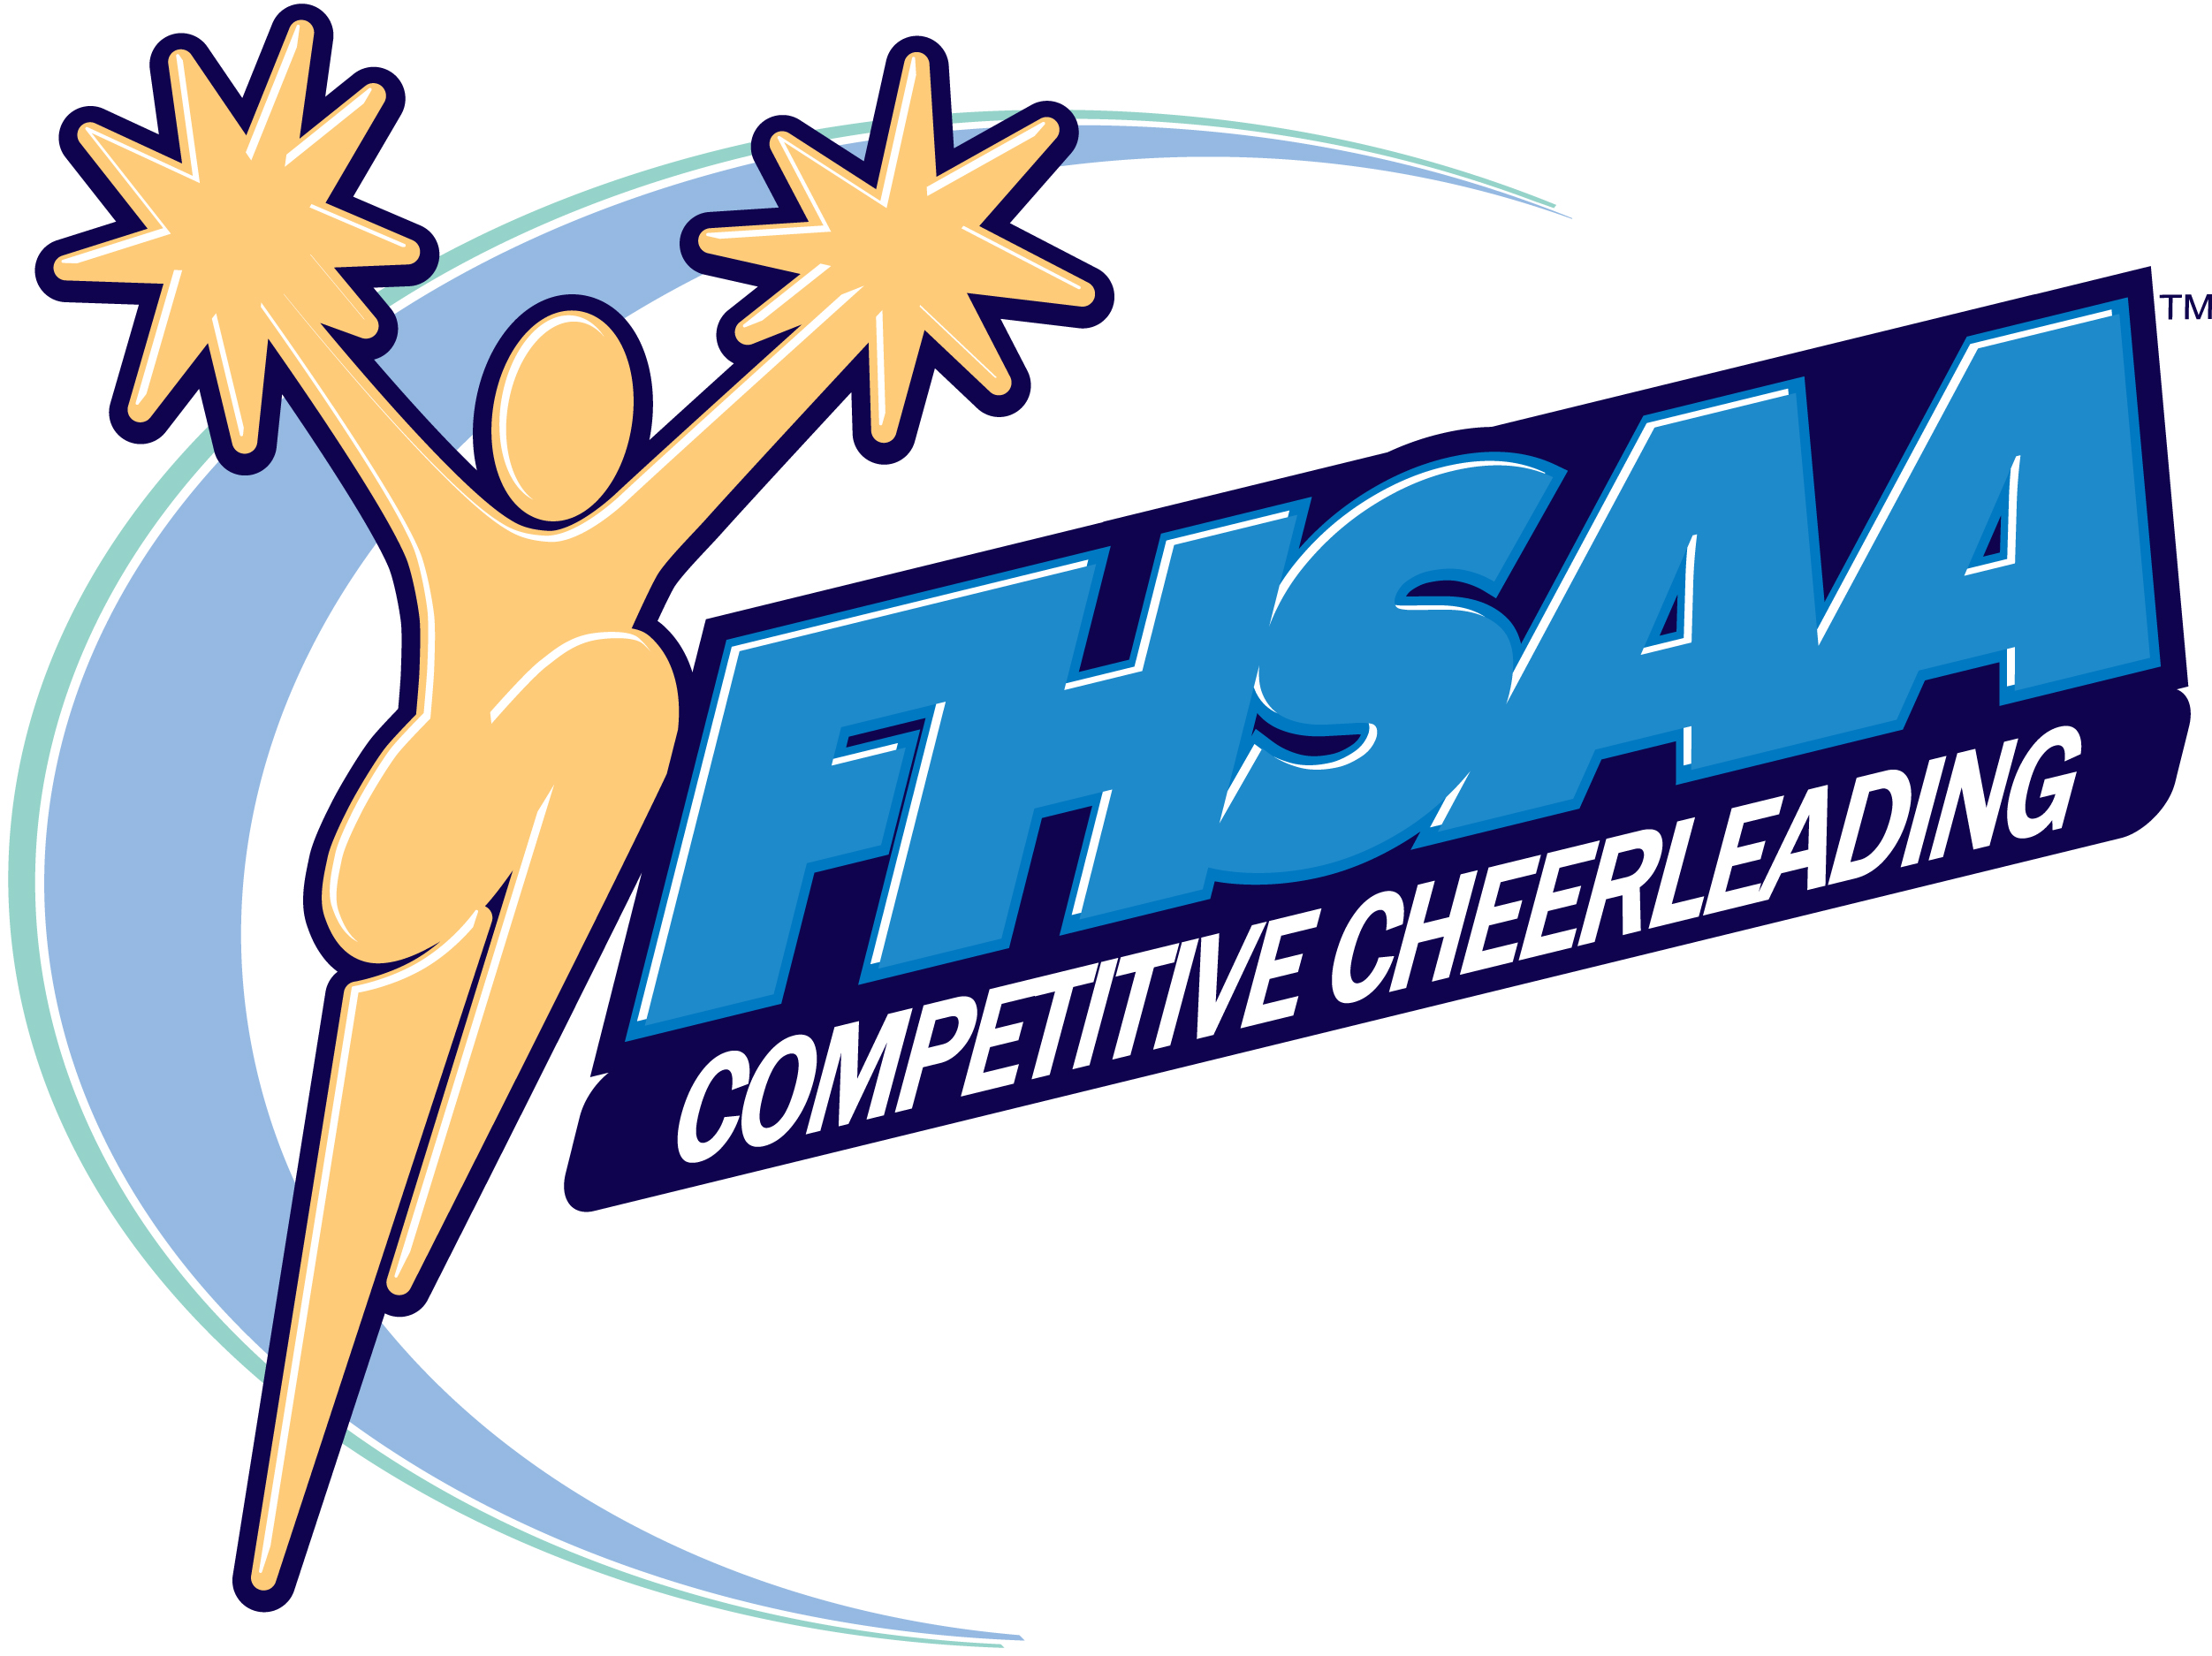 FHSAA Competitive Cheerleading State Championships